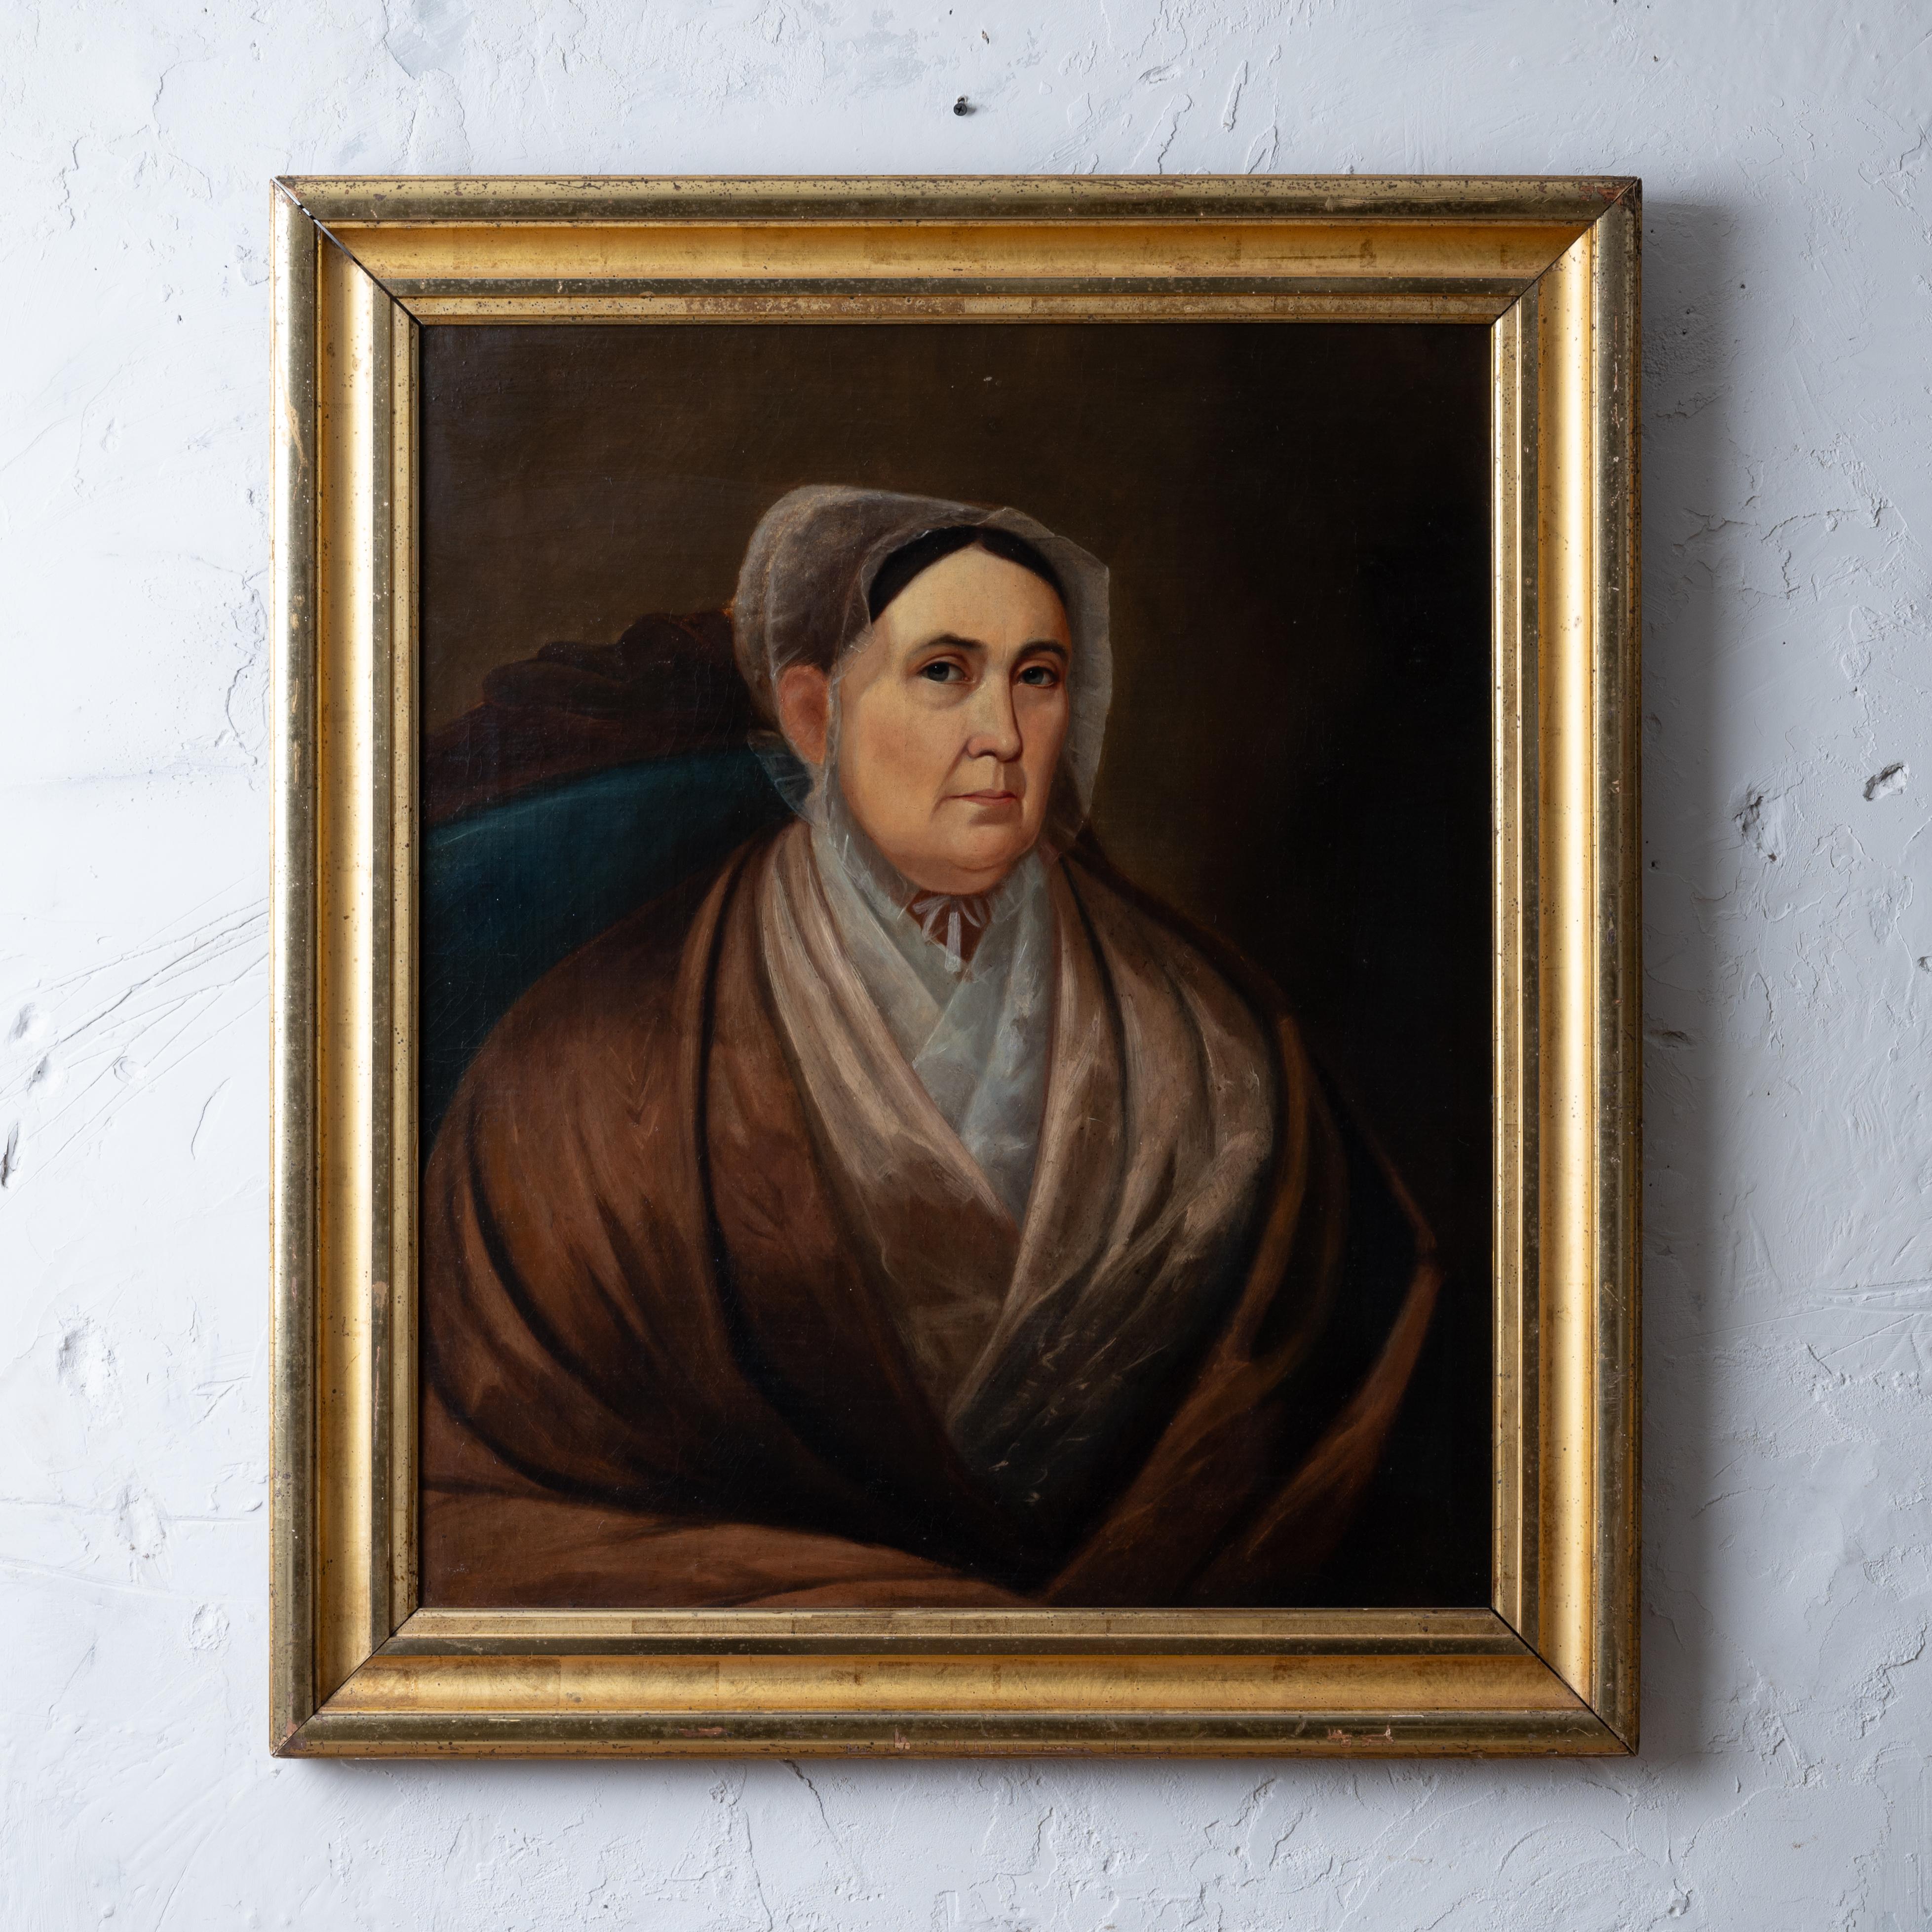 A primitive portrait of a lady, mid 19th century.

canvas: 25 by 30 inches
frame: 31 by 36 inches